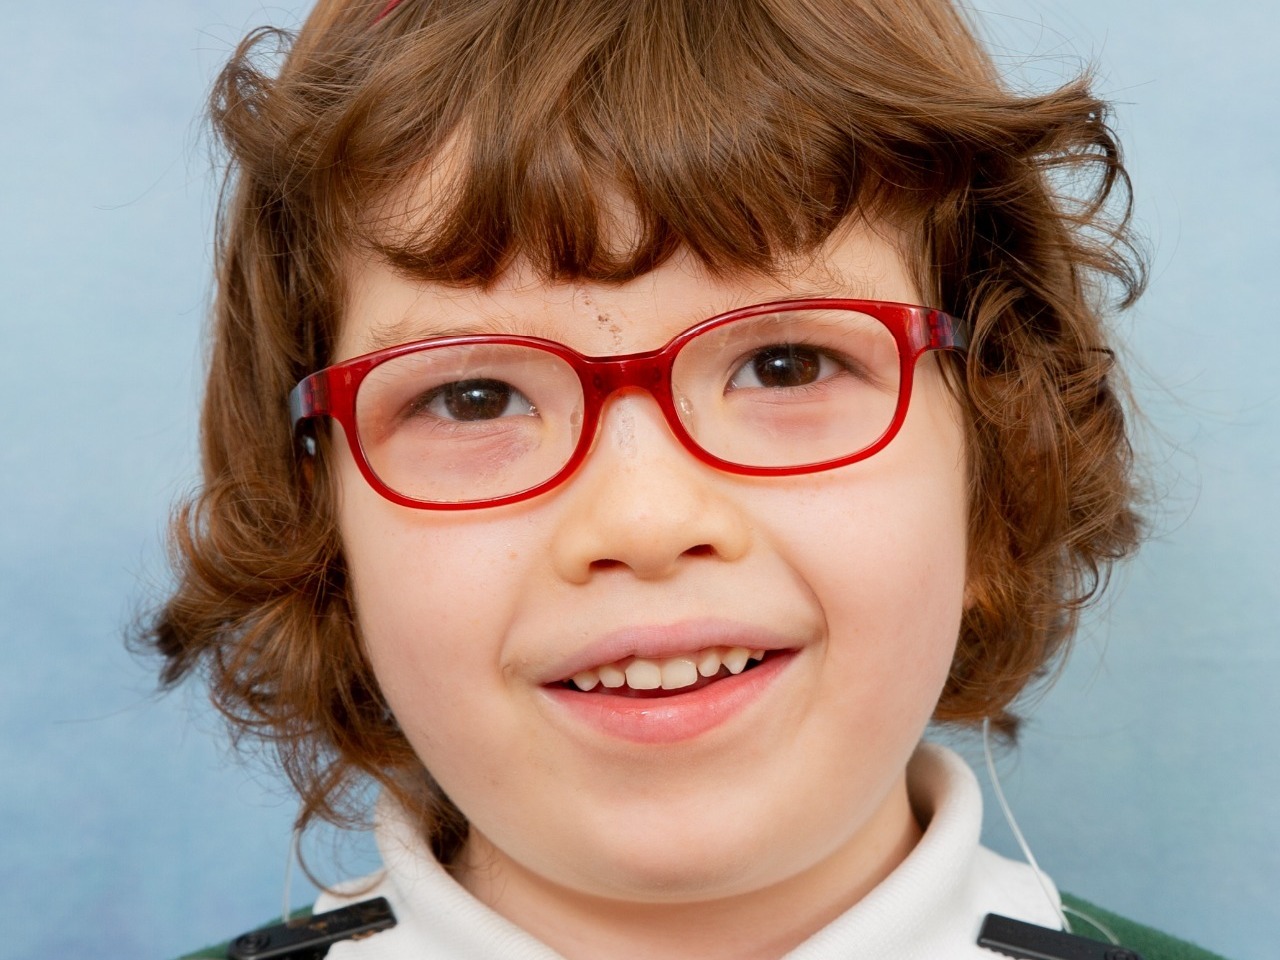 Beautiful young lady with special needs having her formal school photo